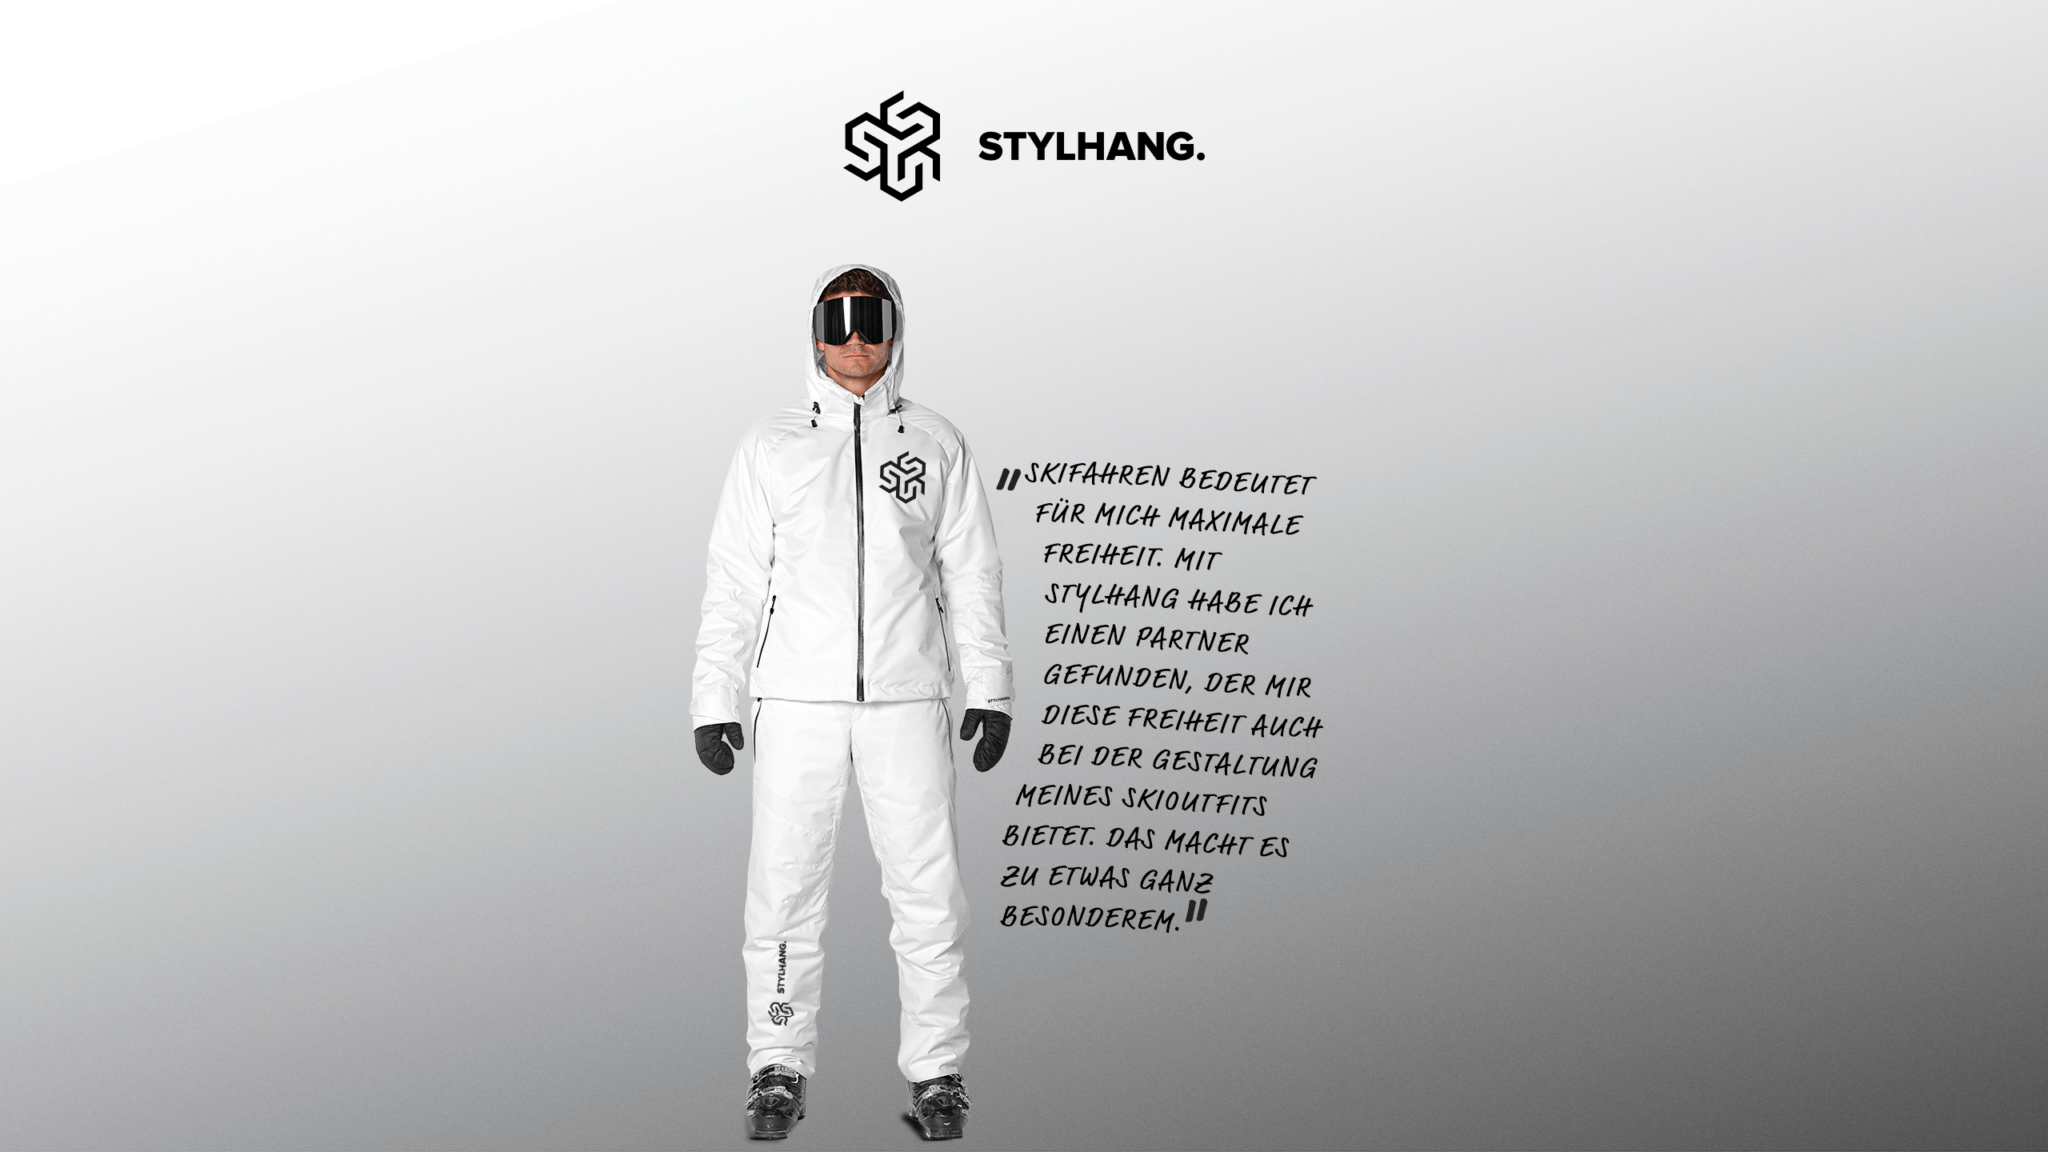 Stylhang_Outfit_White_Men